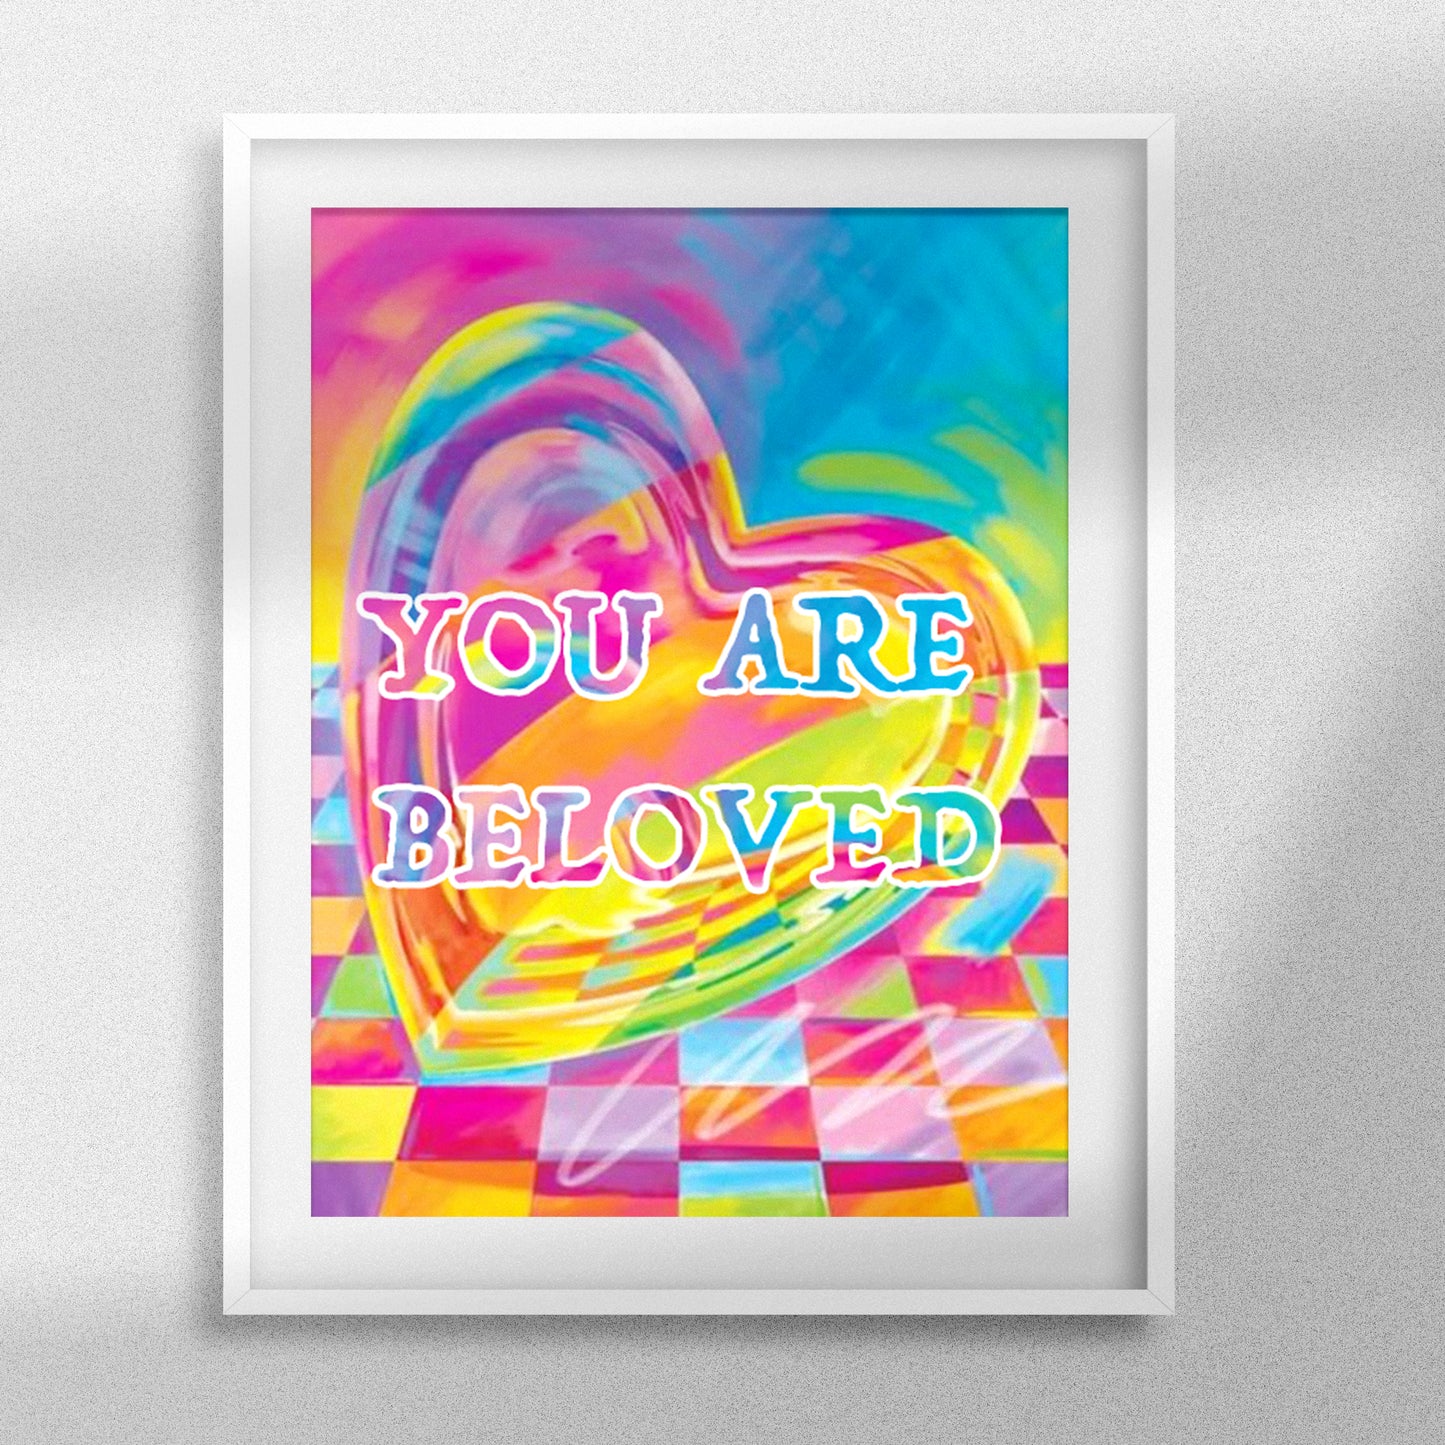 You are Beloved - Round with AB diamonds